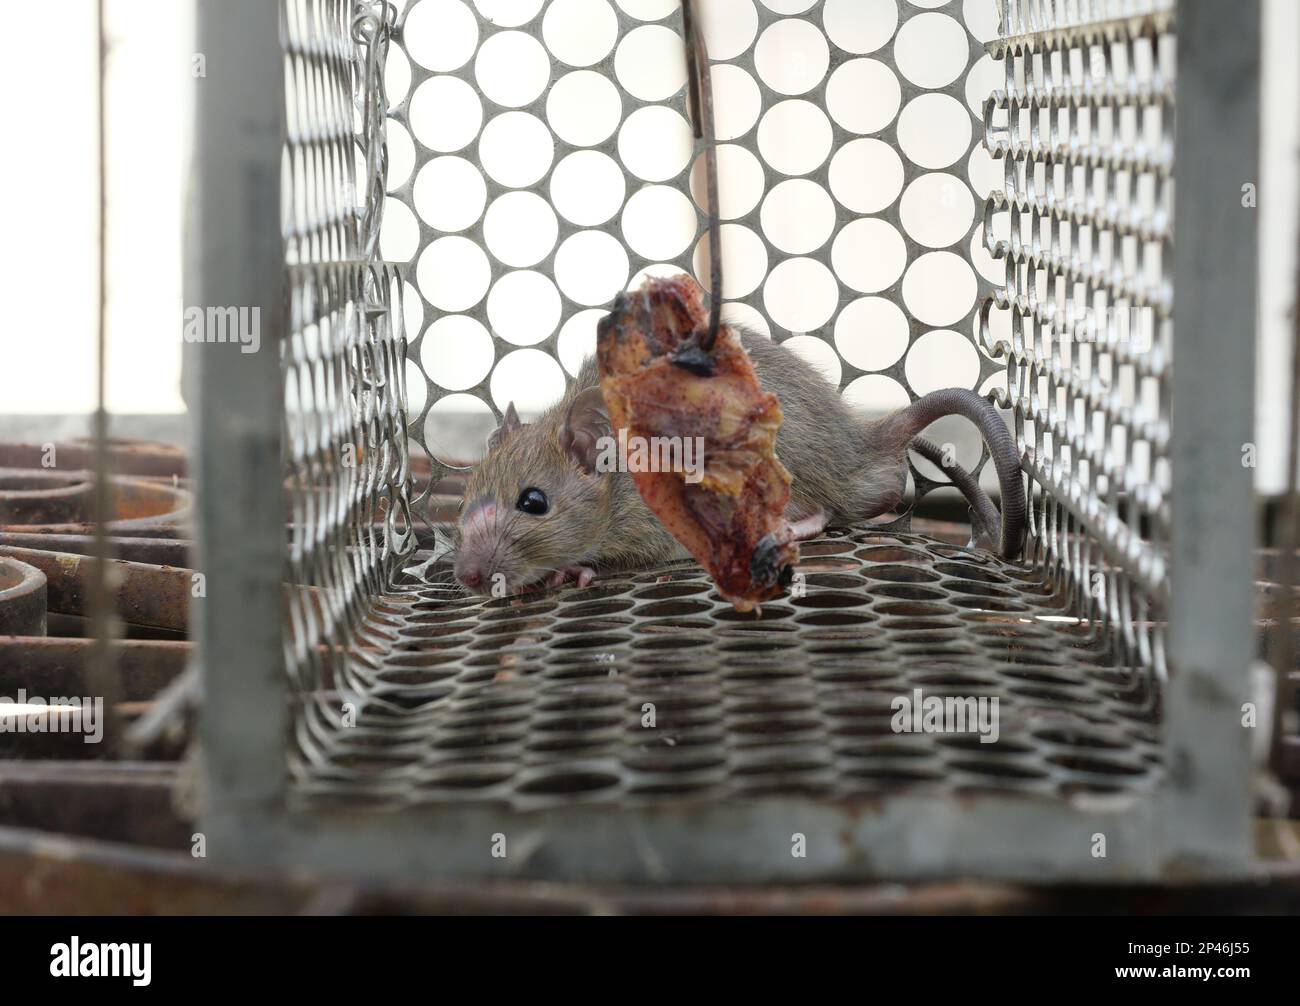 https://c8.alamy.com/comp/2P46J55/rat-in-cage-mousetrap-on-white-background-mouse-finding-a-way-out-of-being-confined-trapping-and-removal-of-rodents-that-cause-2P46J55.jpg